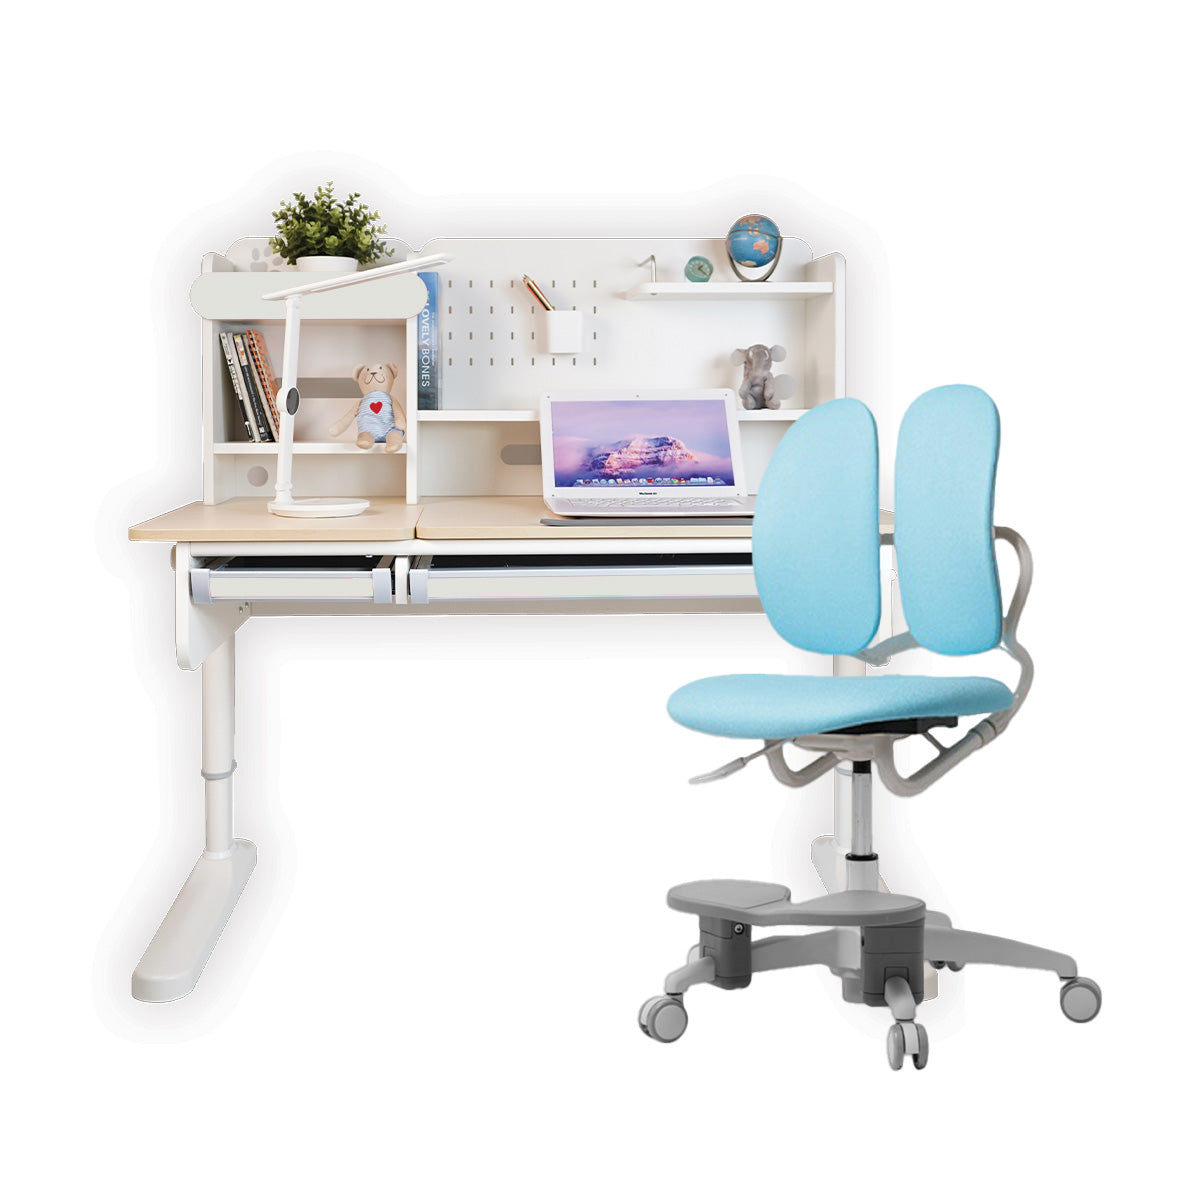 Impact Ergo-Growing Study Desk And Chair Set 1200mm x 650mm, IM-G1200A-GY (Ready Stock)